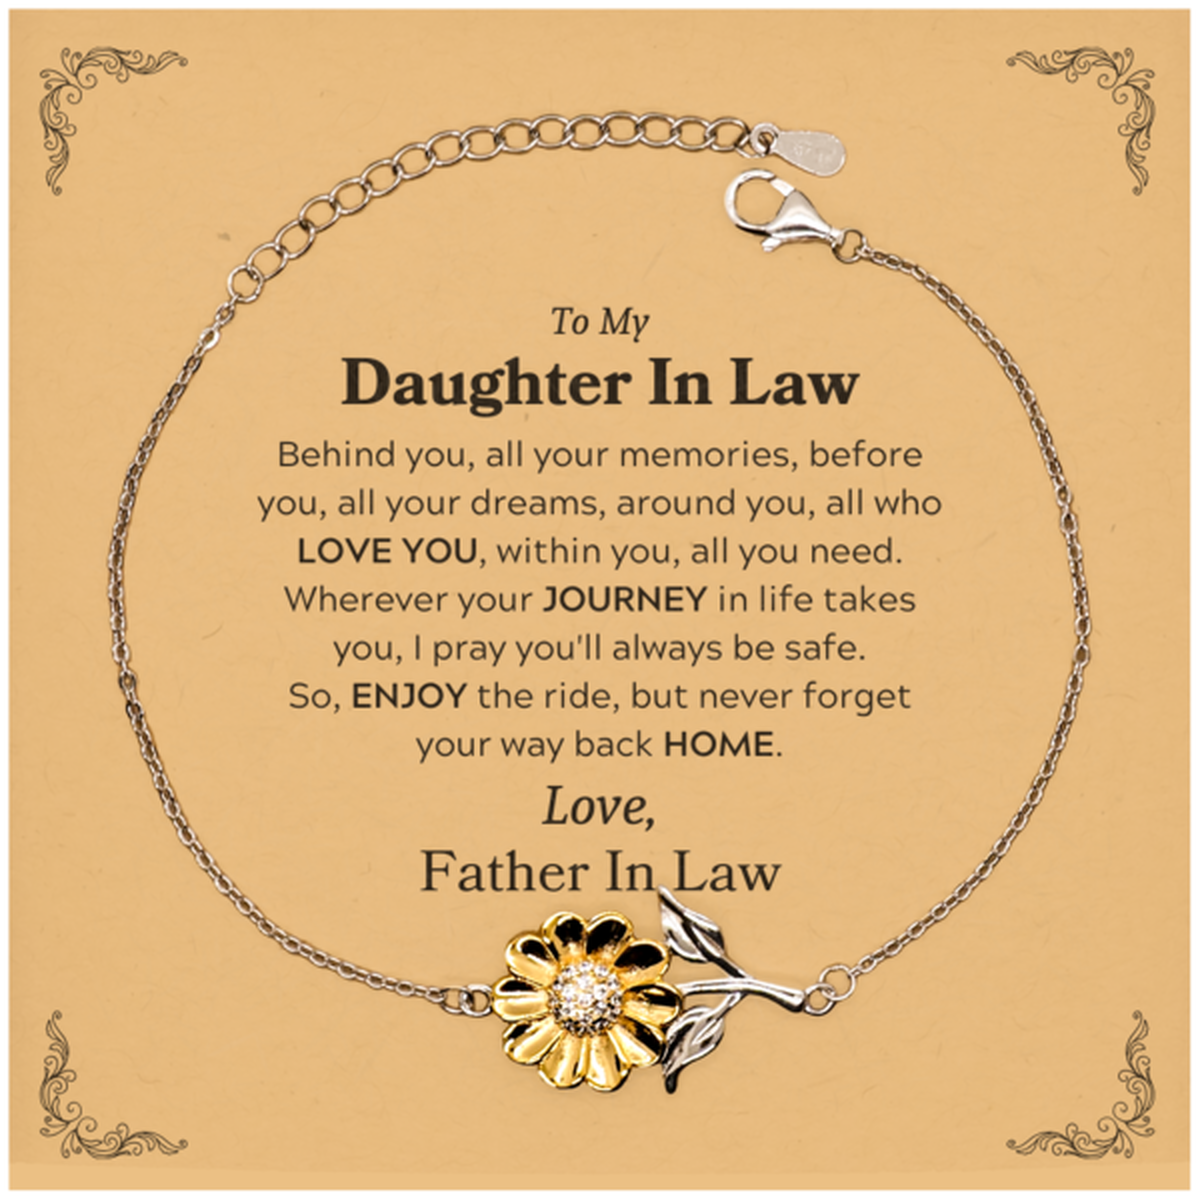 To My Daughter In Law Graduation Gifts from Father In Law, Daughter In Law Sunflower Bracelet Christmas Birthday Gifts for Daughter In Law Behind you, all your memories, before you, all your dreams. Love, Father In Law